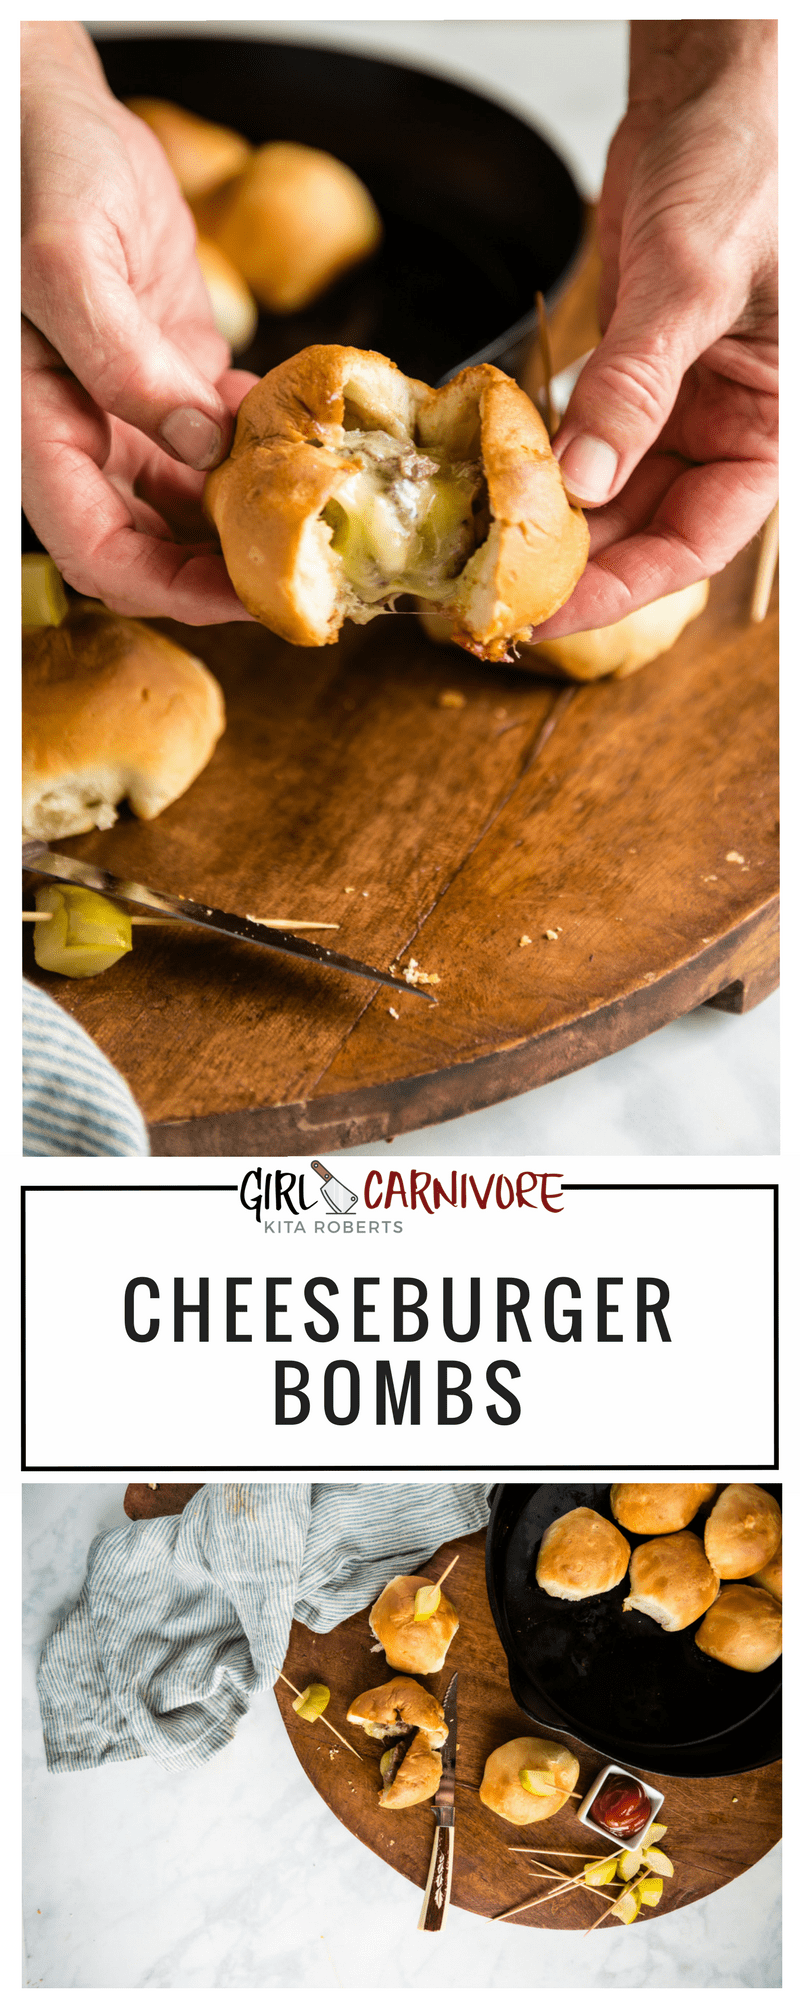 Imagine perfect cheesy little burgers in mini bite-sized pockets! This Cheeseburger Bomb Recipe would be perfect for entertaining. Snacks that make you happy. 